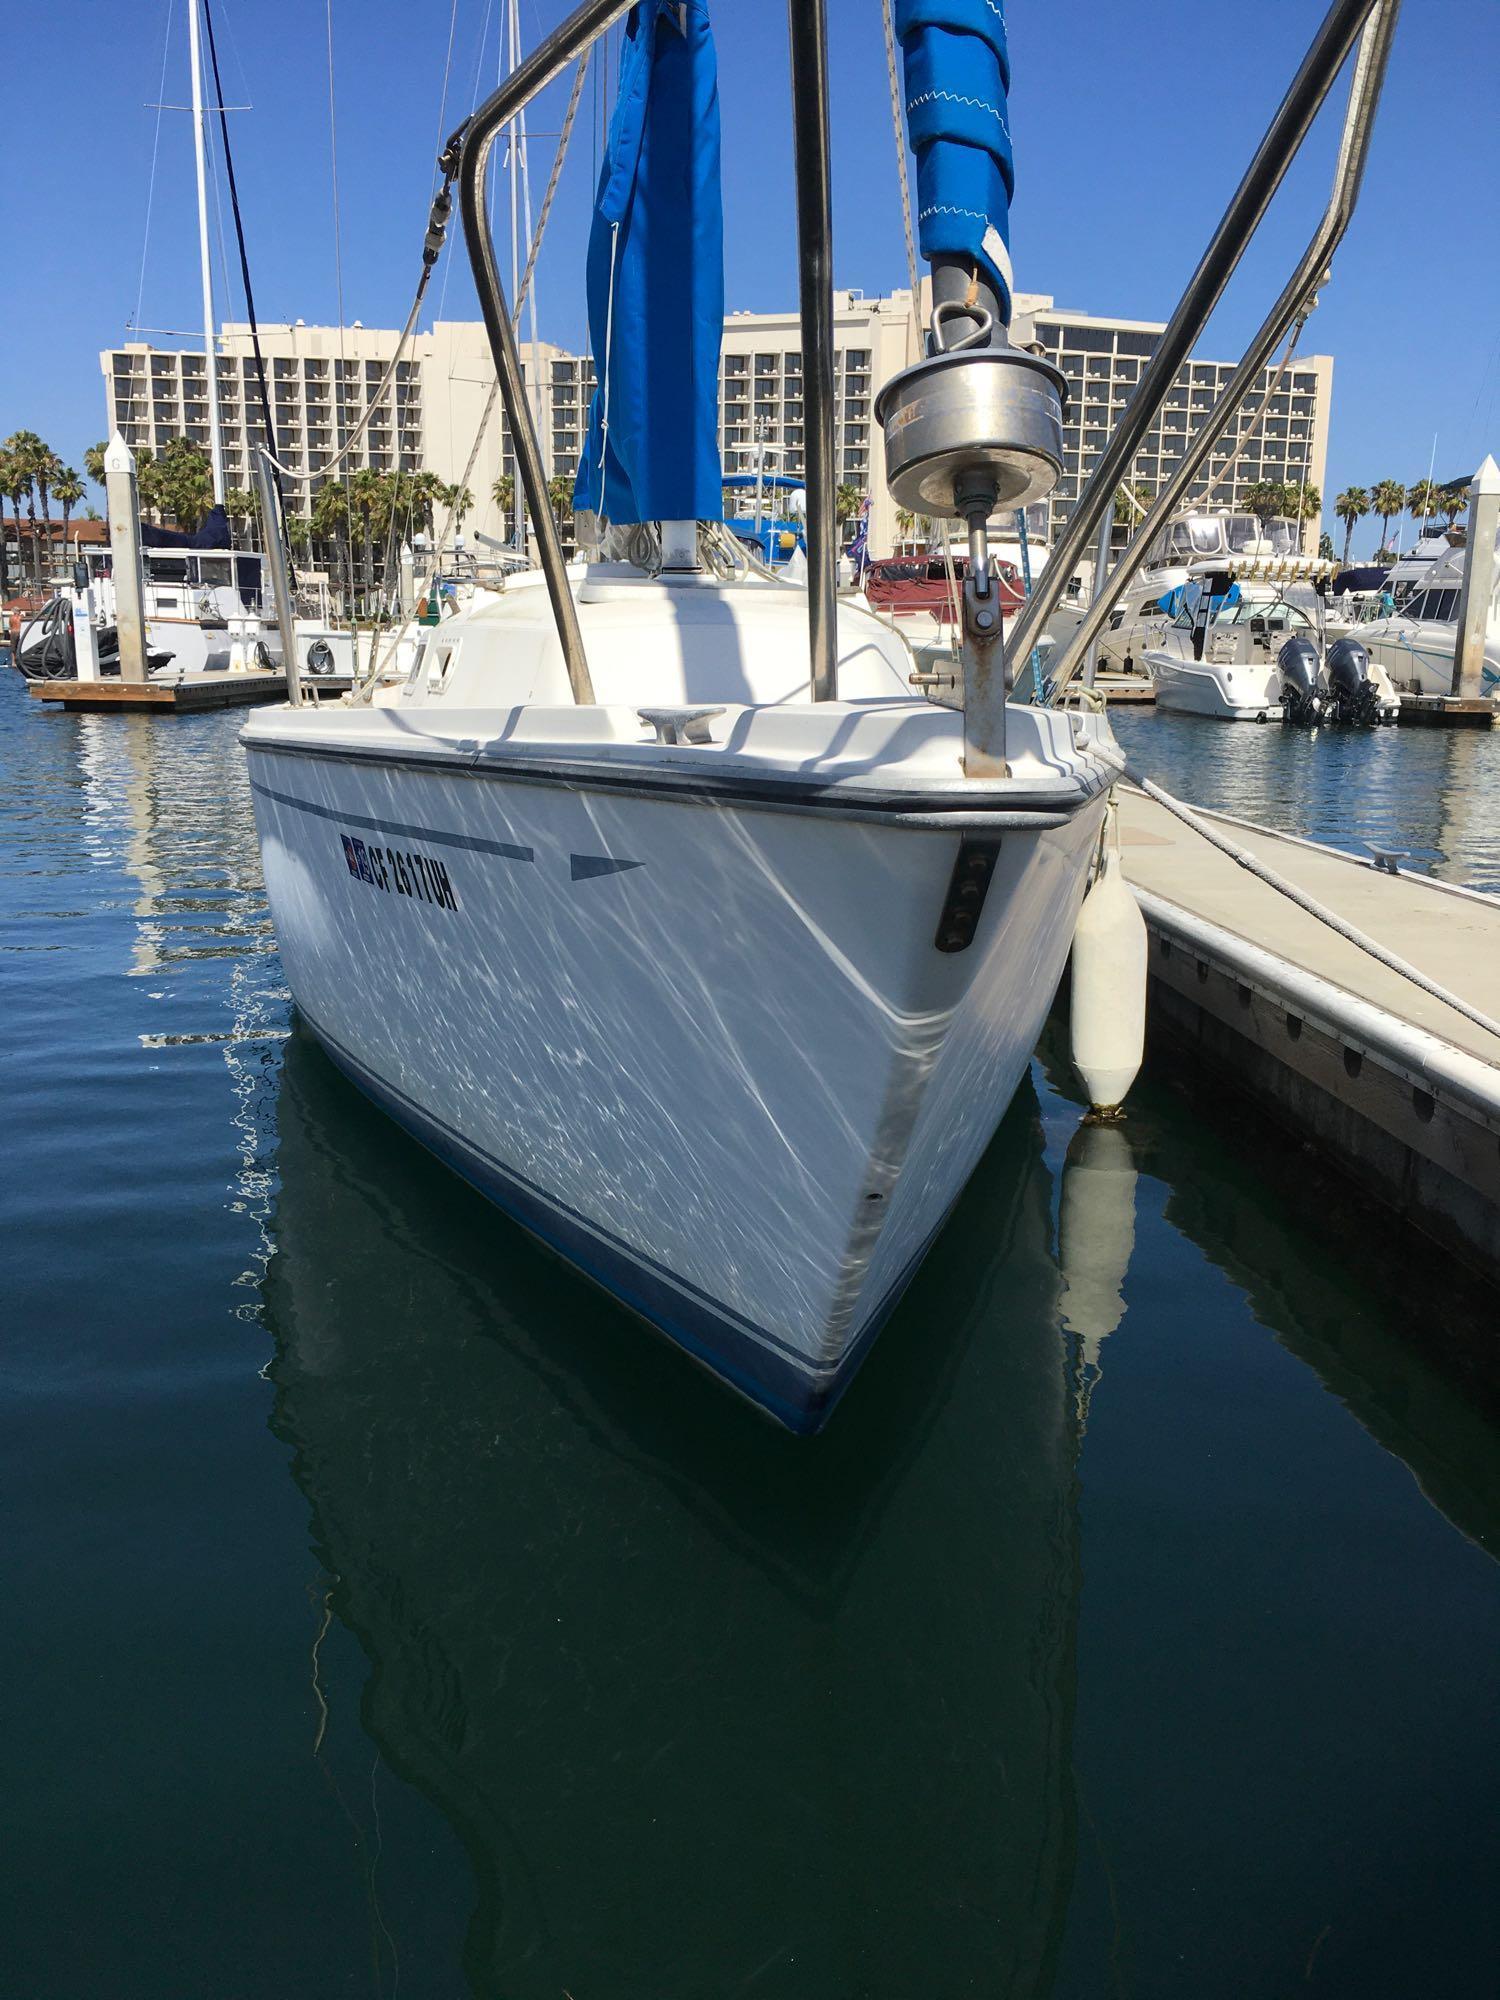 1984 CAL 24' Sail boat and Outboard motor.  Boy Scouts of America Donation